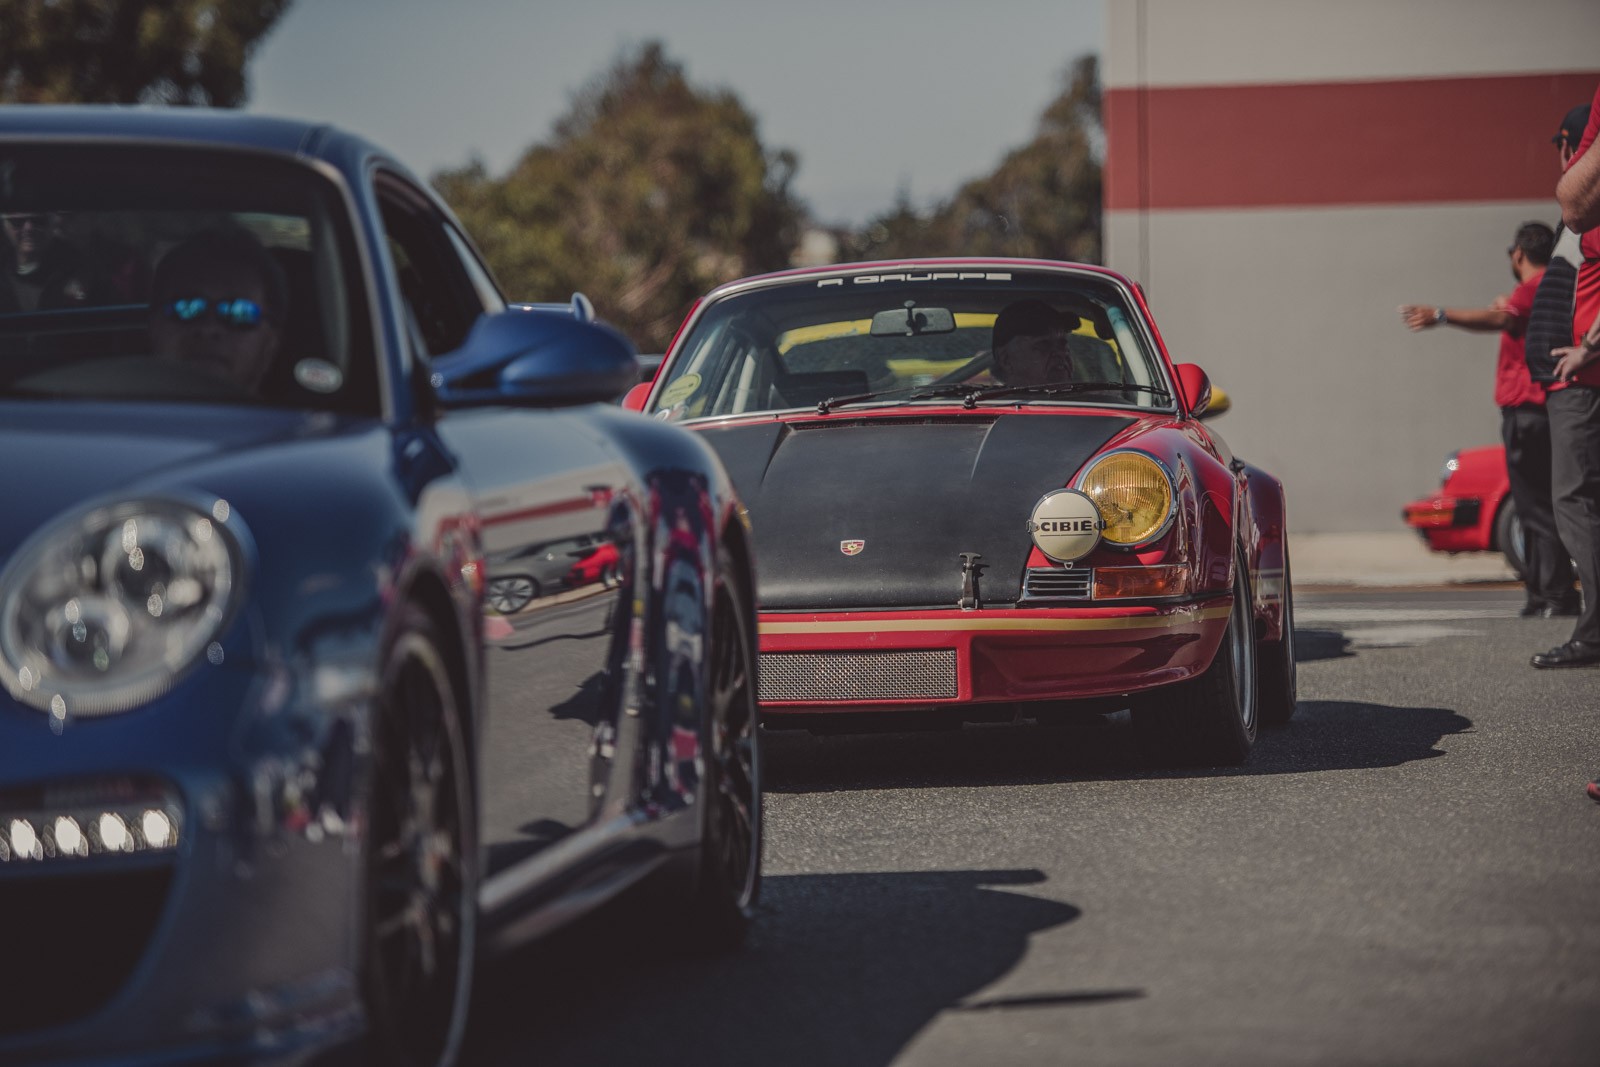 Porsche owners pulling in to park at the Porsche Classic event